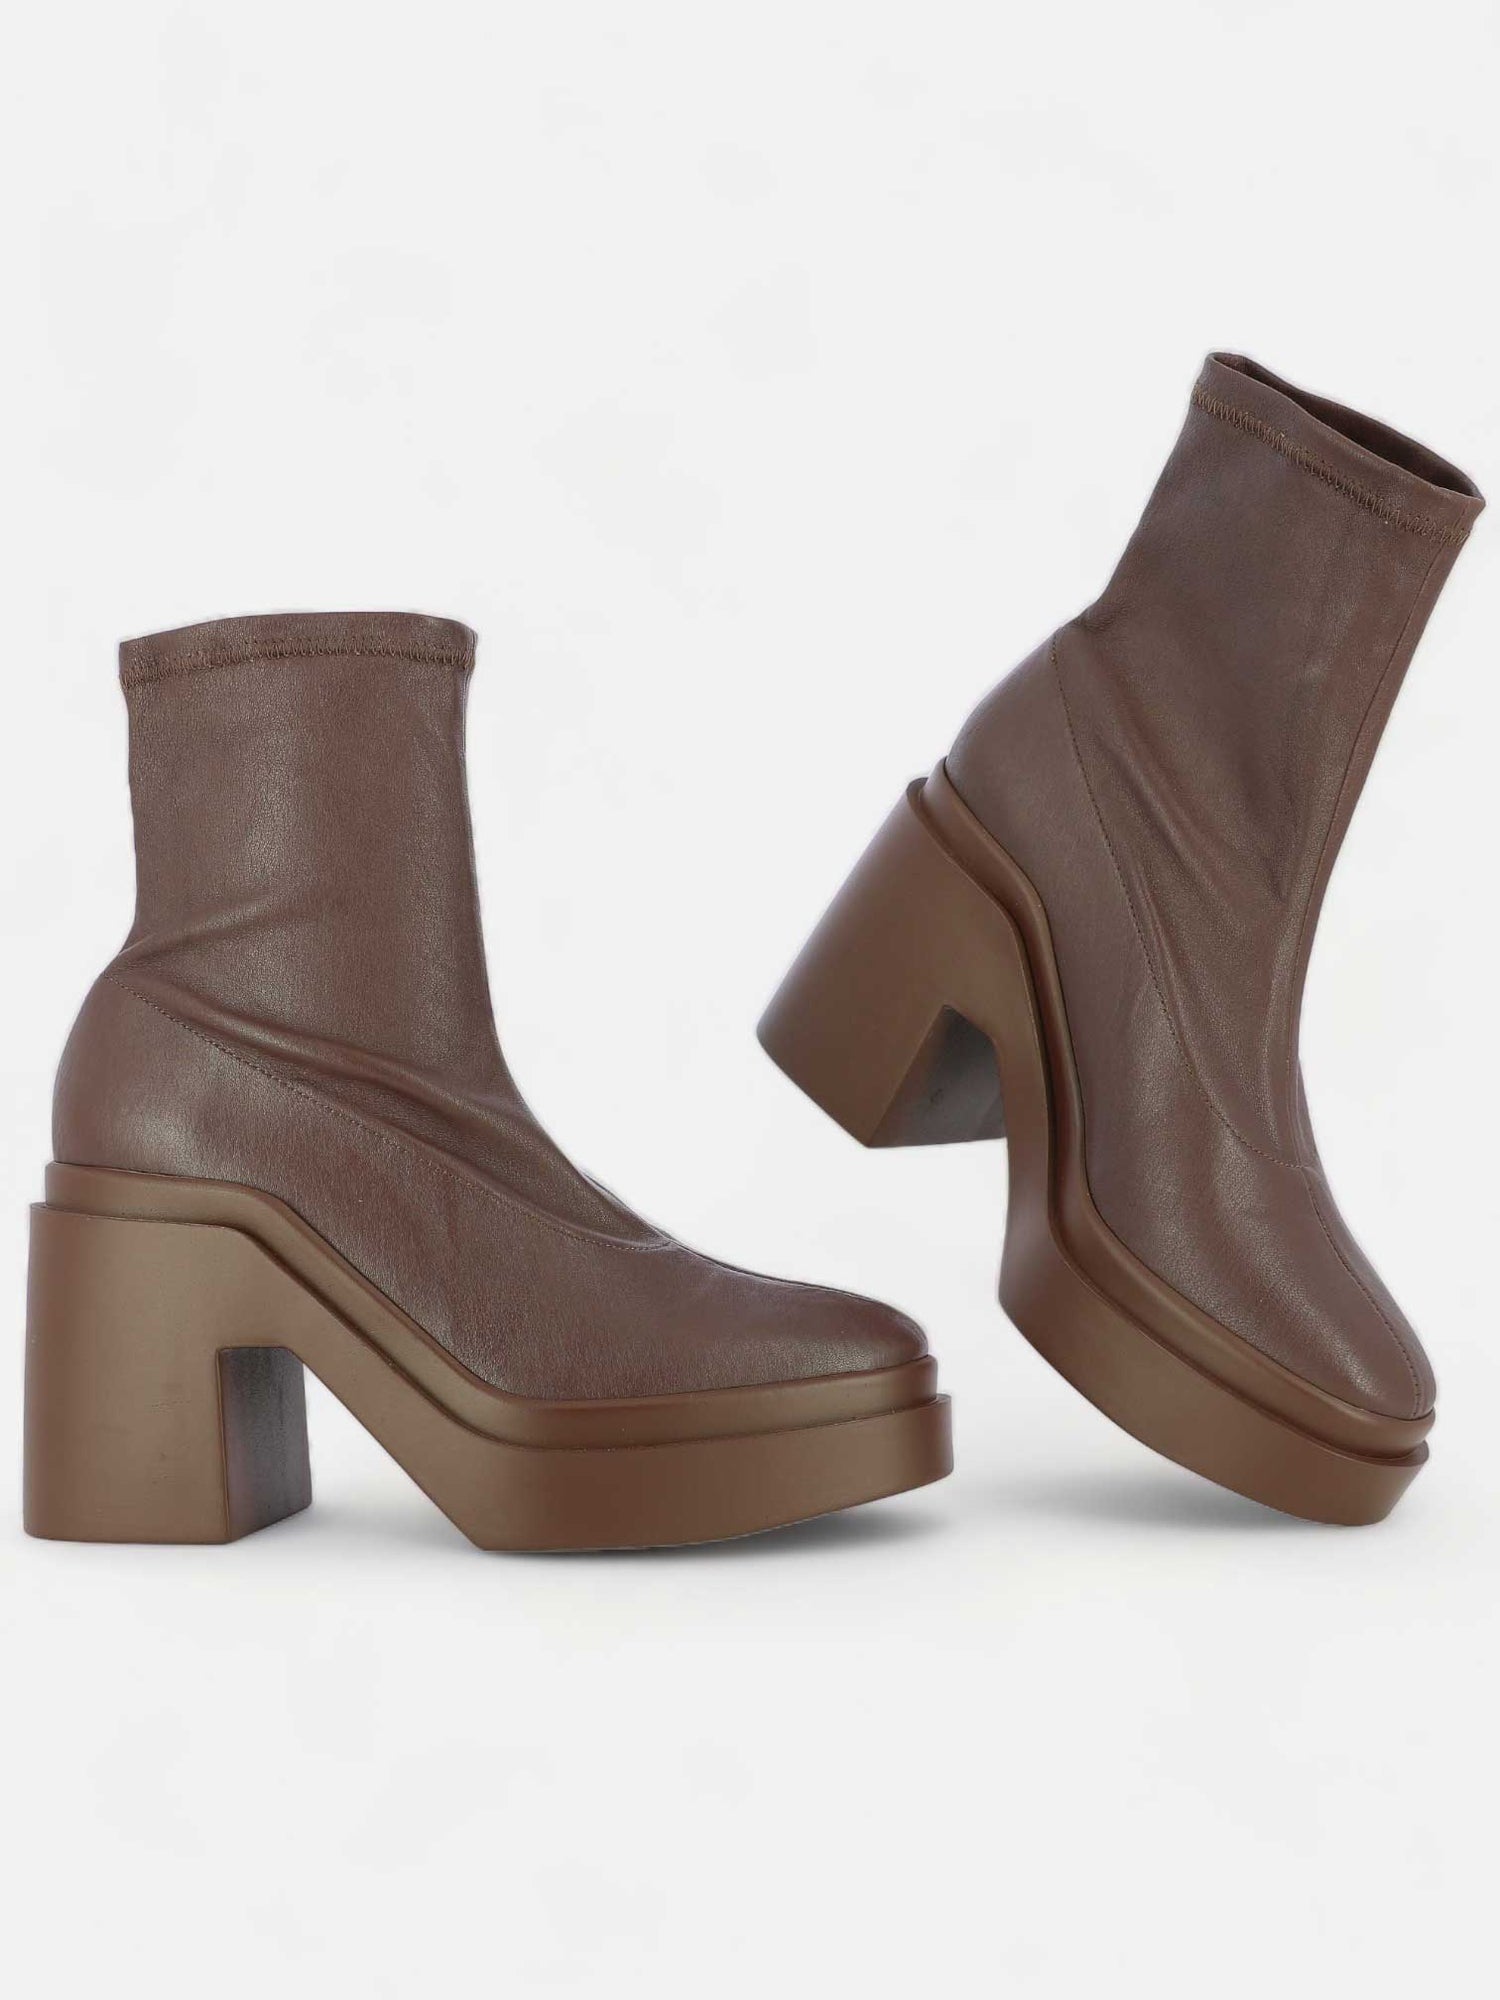 ANKLE BOOTS - NINA ankle boots, leather dark brown - 3606063904759 - Clergerie Paris - Europe